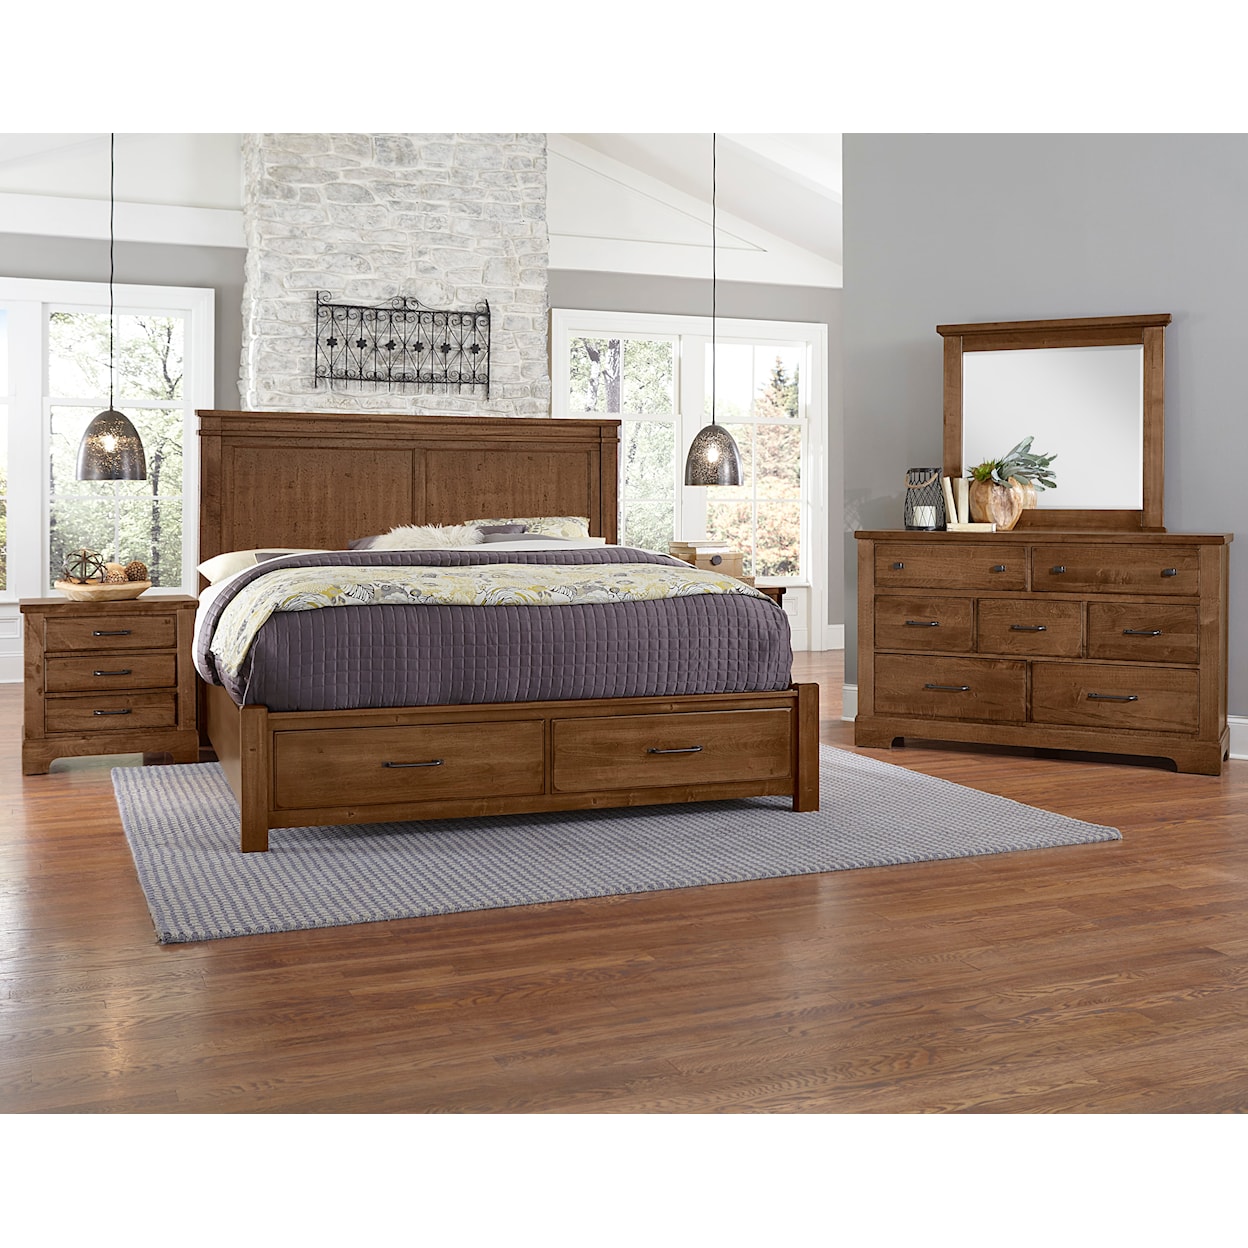 Artisan & Post Cool Rustic Queen Mansion Storage Bed